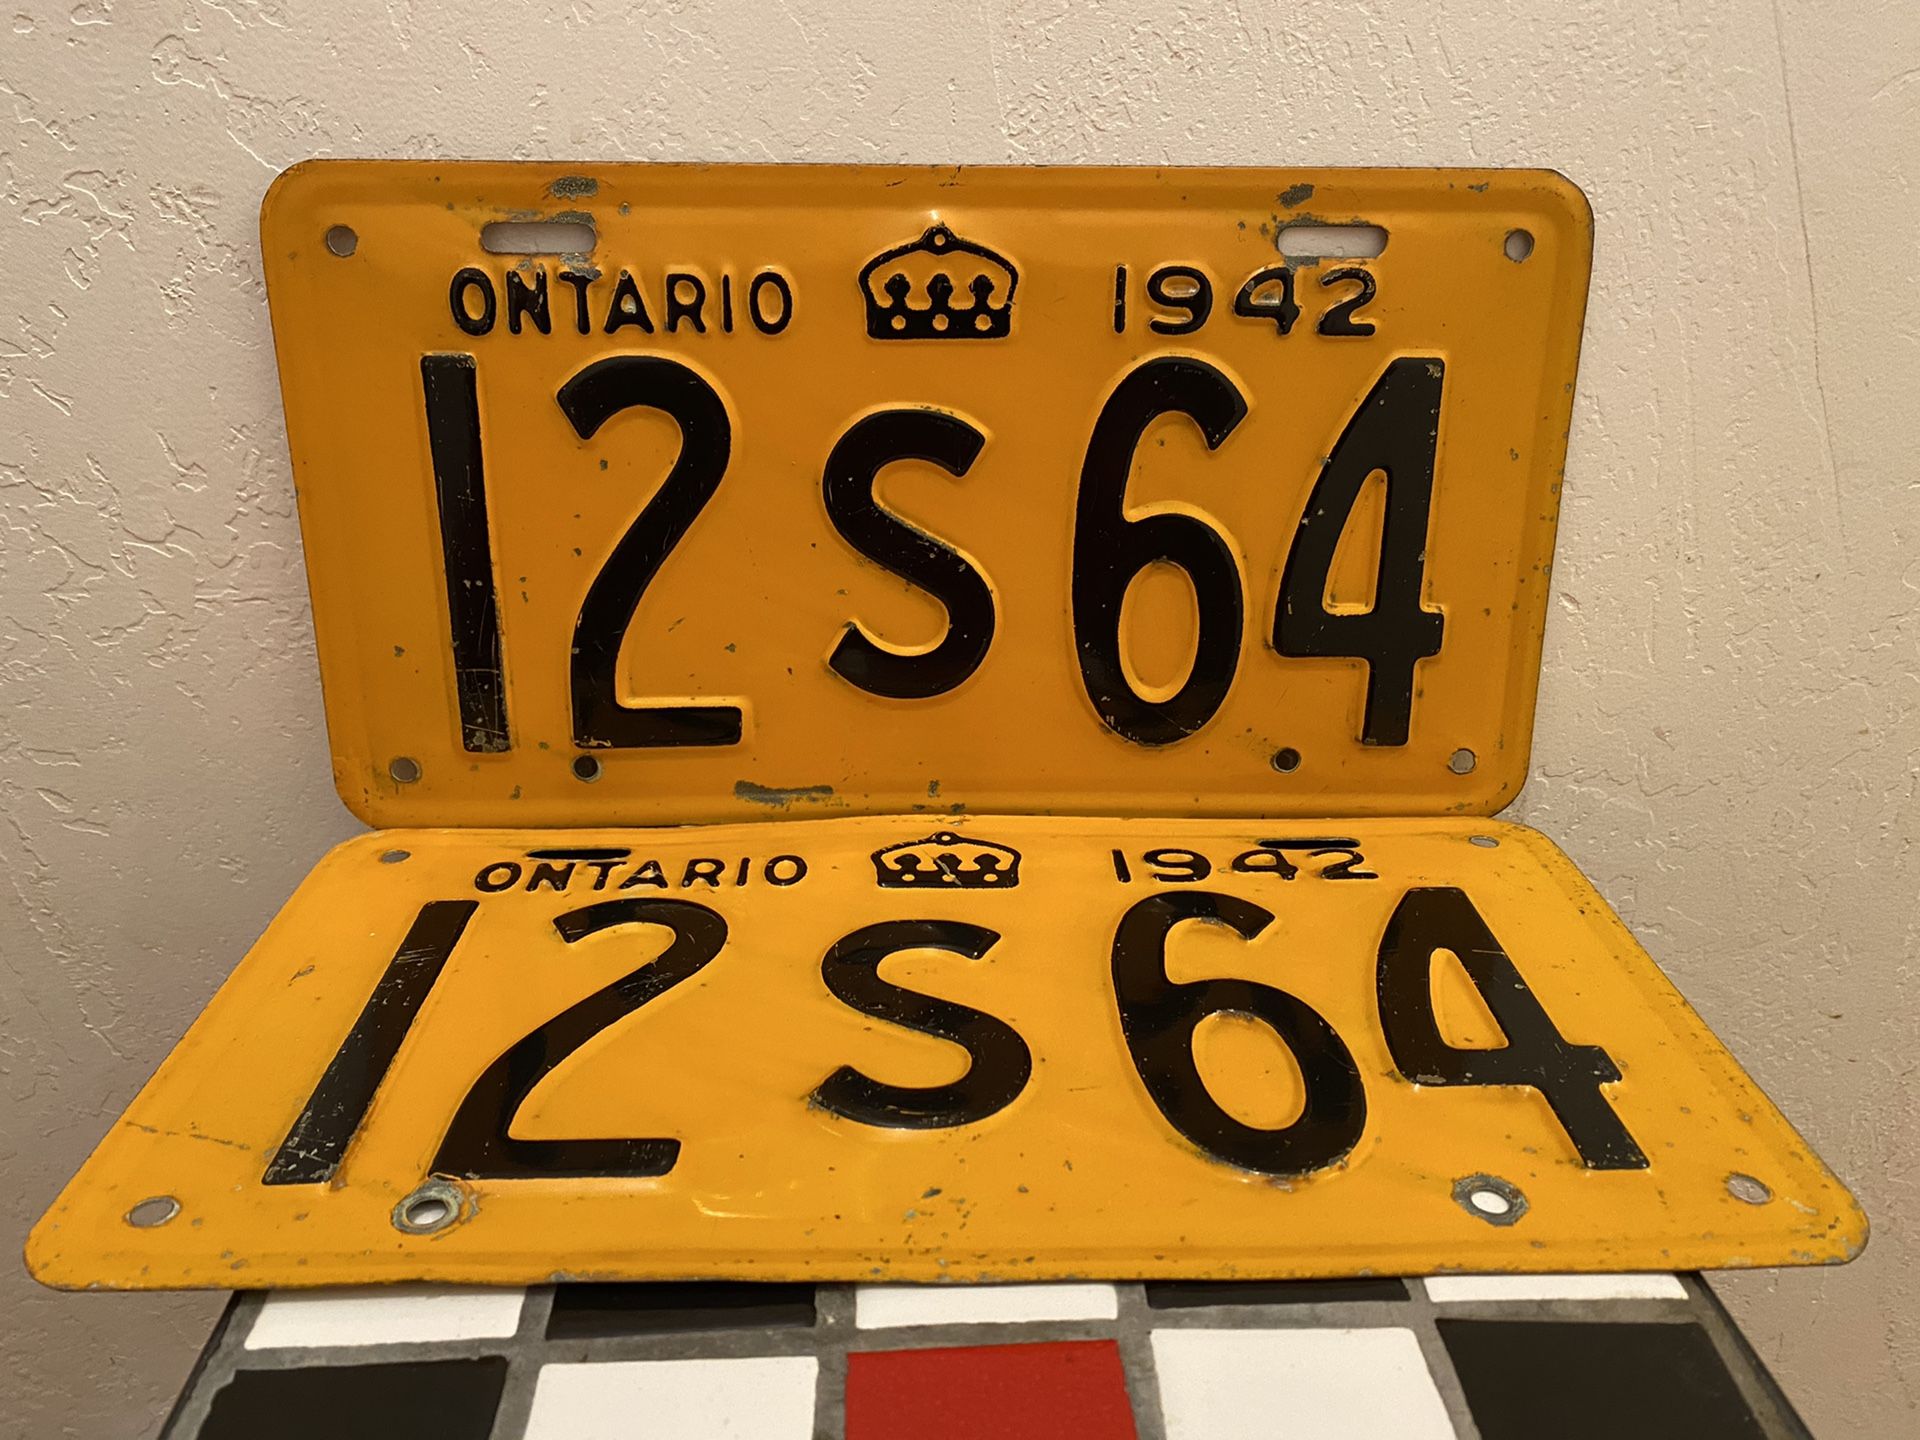 1942 Ontario license plate